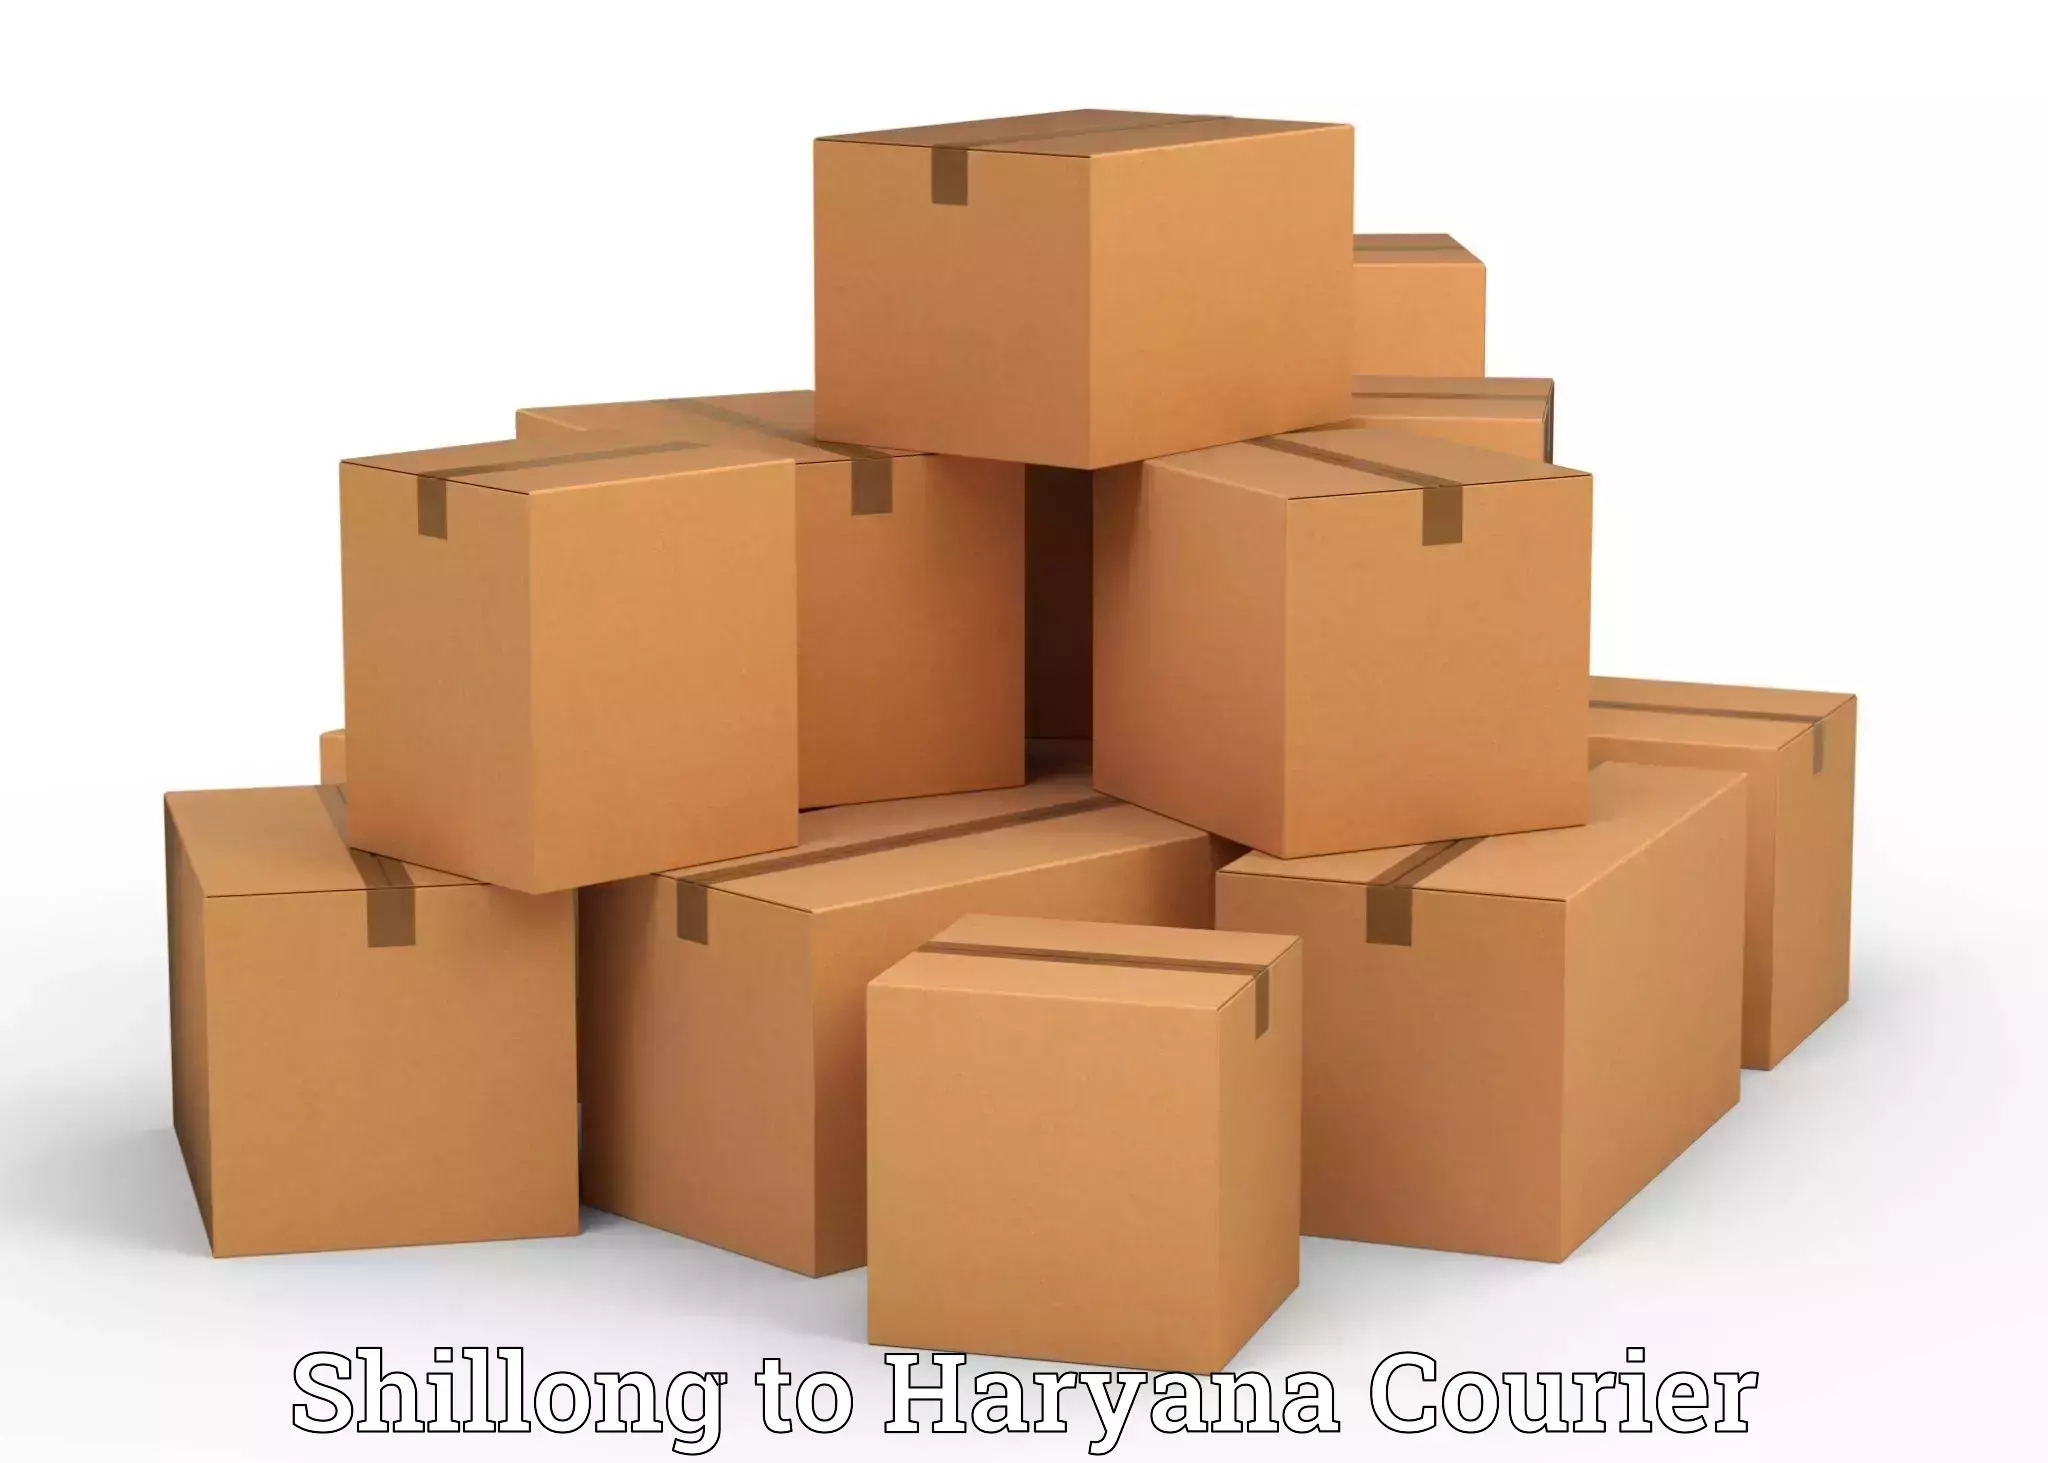 Trusted furniture movers in Shillong to Loharu